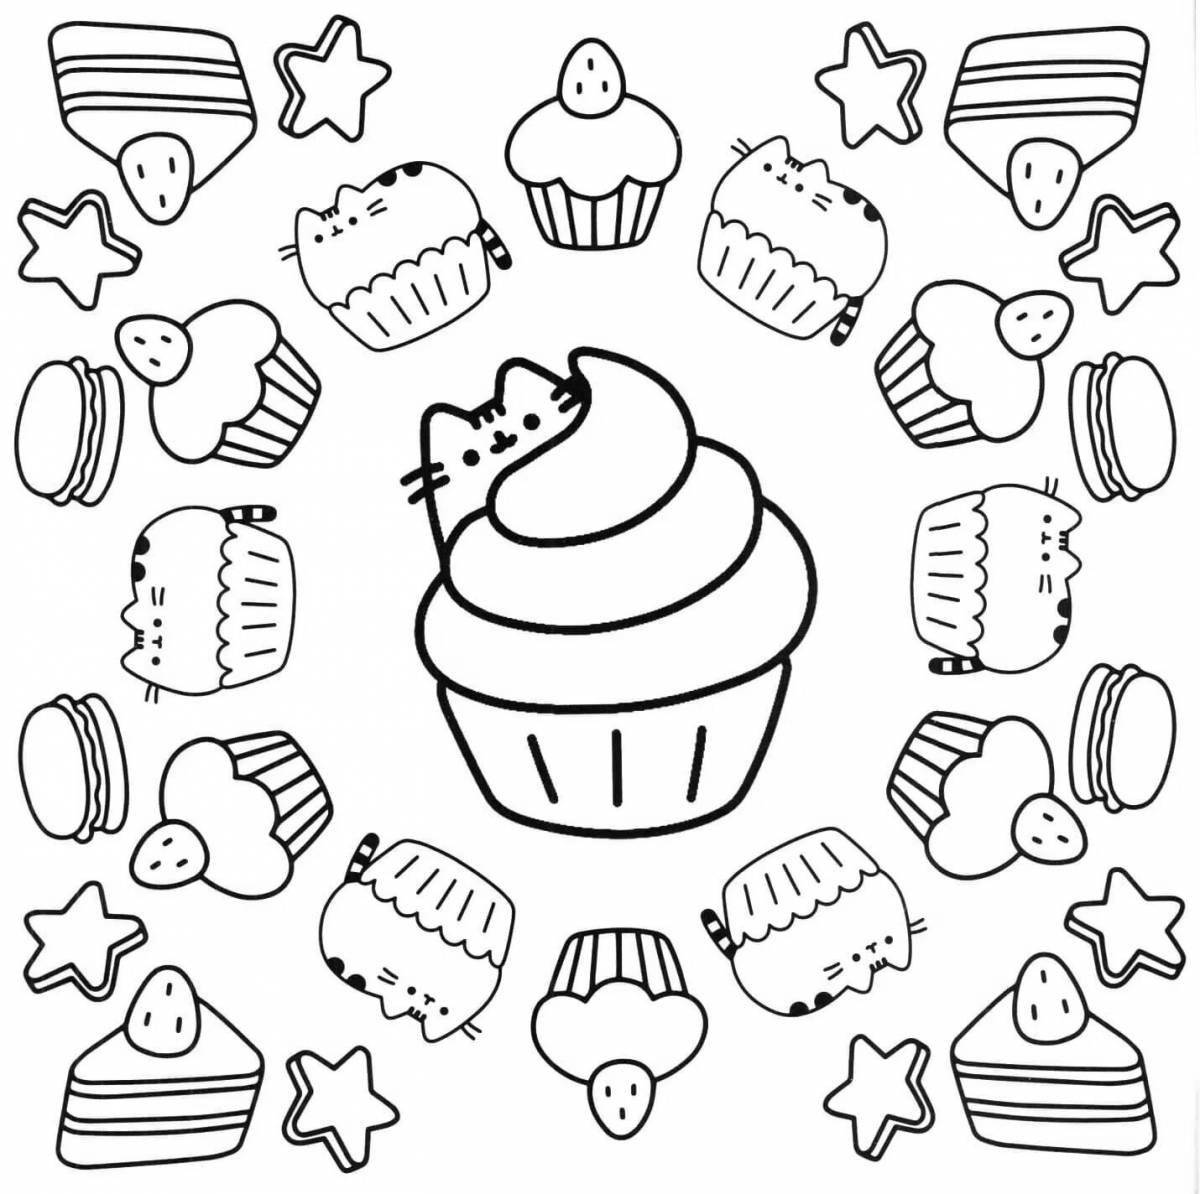 Charming sweets coloring book